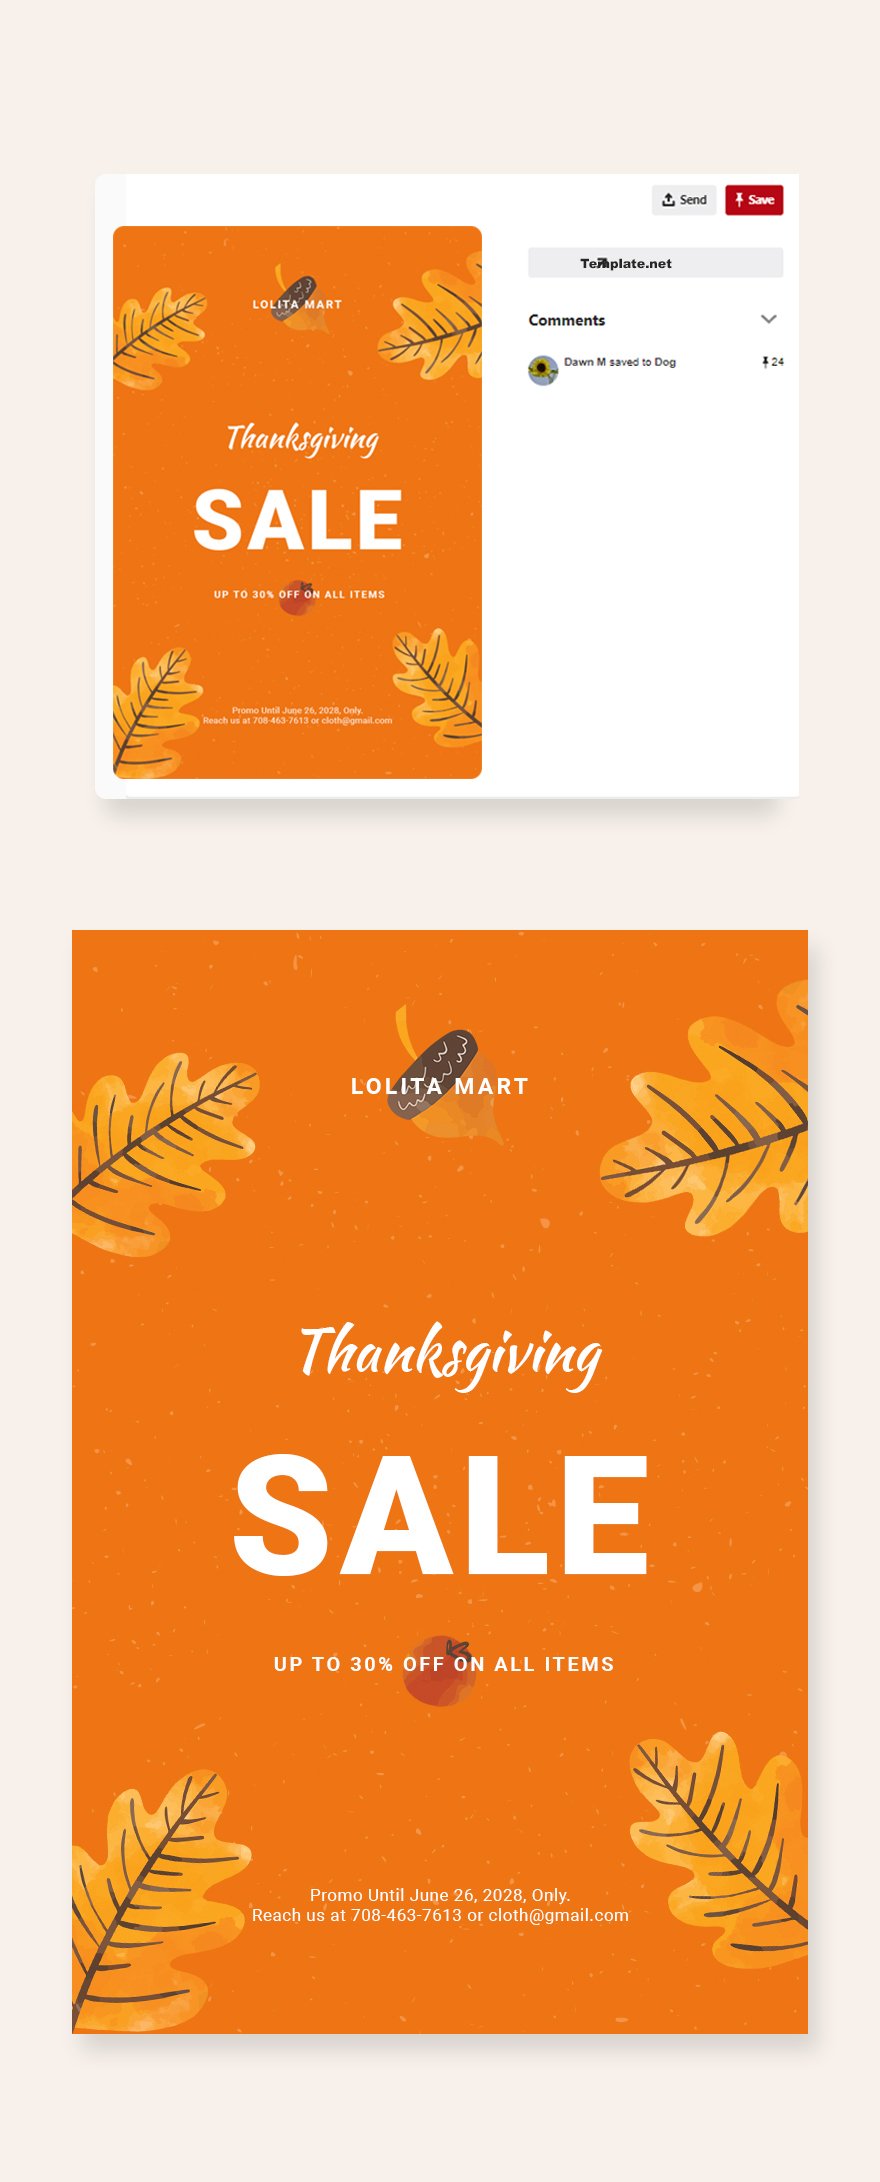 Free Holiday Special Sale Pinterest Pin Template PSD Template net